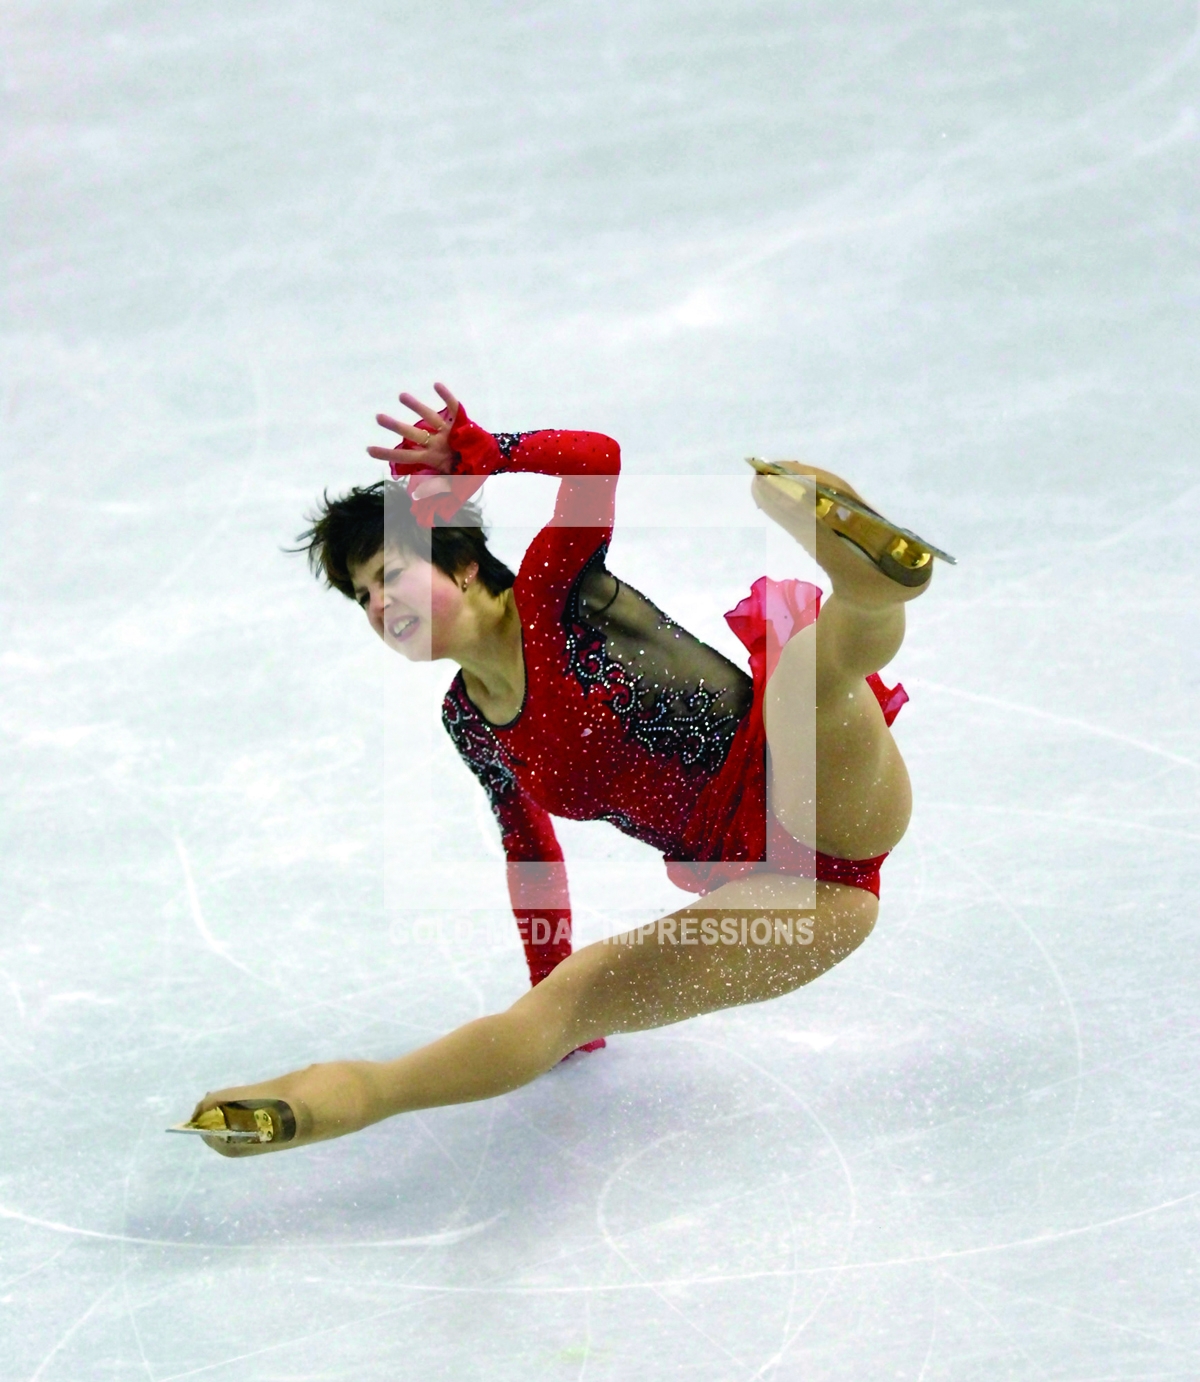 Russia Irina Slutskaya takes a disasterous fall in her attempt to win a gold medal in the women's ice skating final in Torino, Italy on February 23, 2006. Irina won the Bronze Medal.(AP Photo/Dick Druckman)